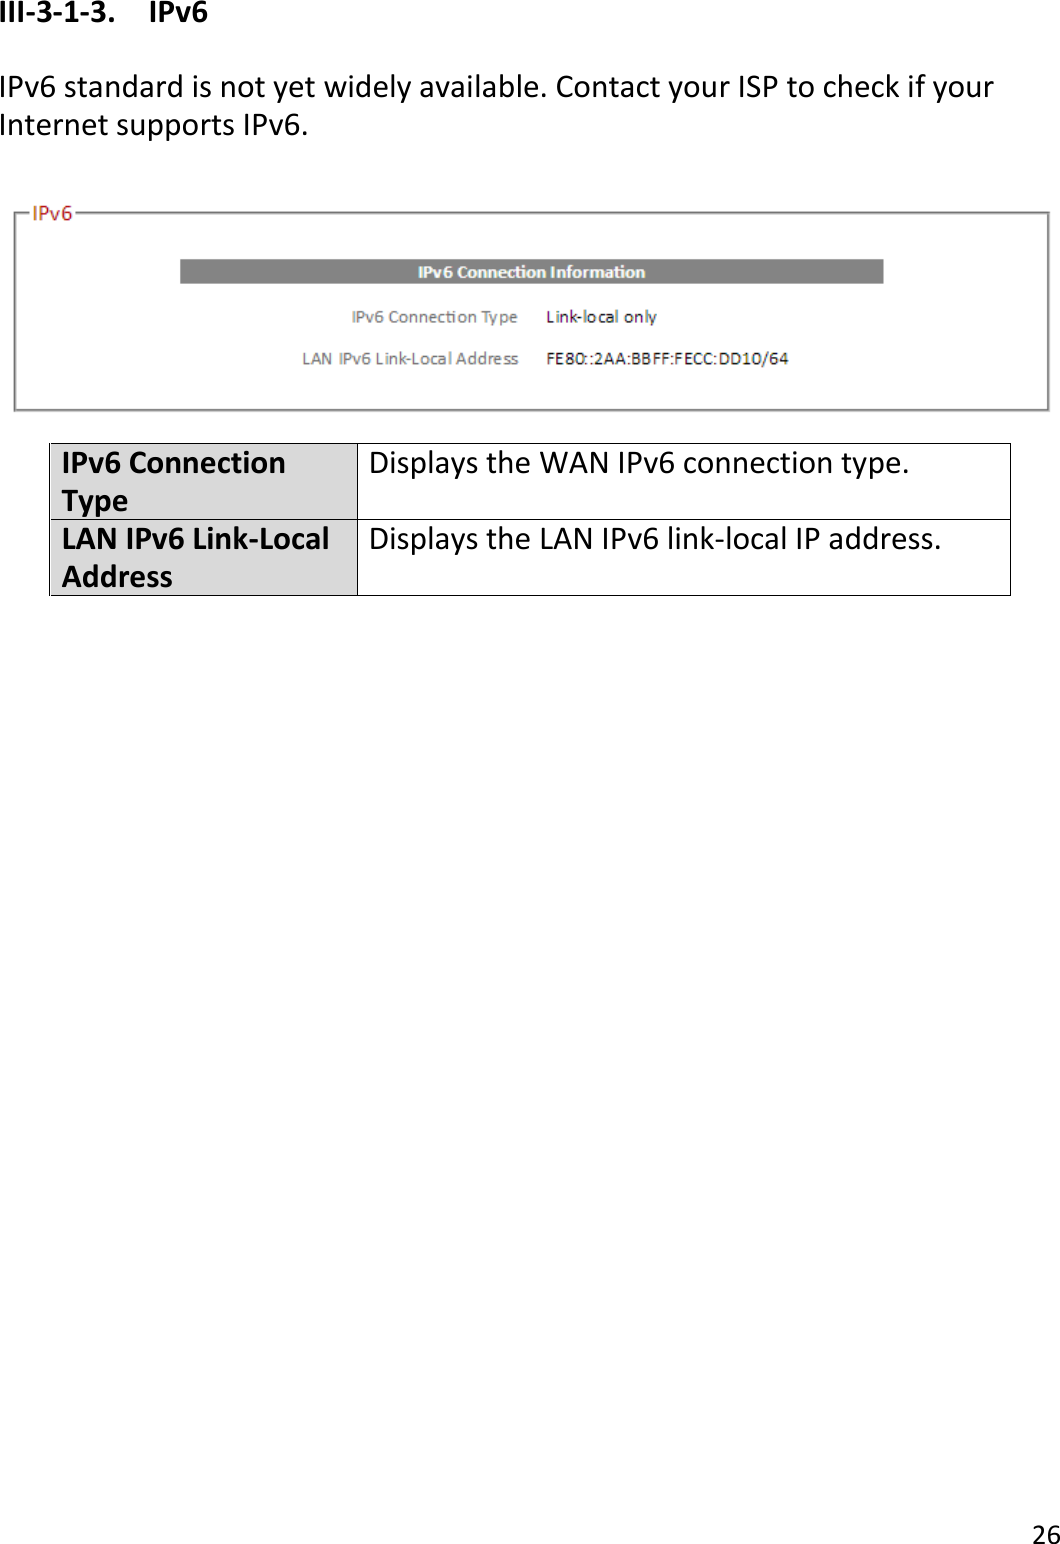 26  III-3-1-3.  IPv6  IPv6 standard is not yet widely available. Contact your ISP to check if your Internet supports IPv6.   IPv6 Connection Type Displays the WAN IPv6 connection type. LAN IPv6 Link-Local Address Displays the LAN IPv6 link-local IP address.  